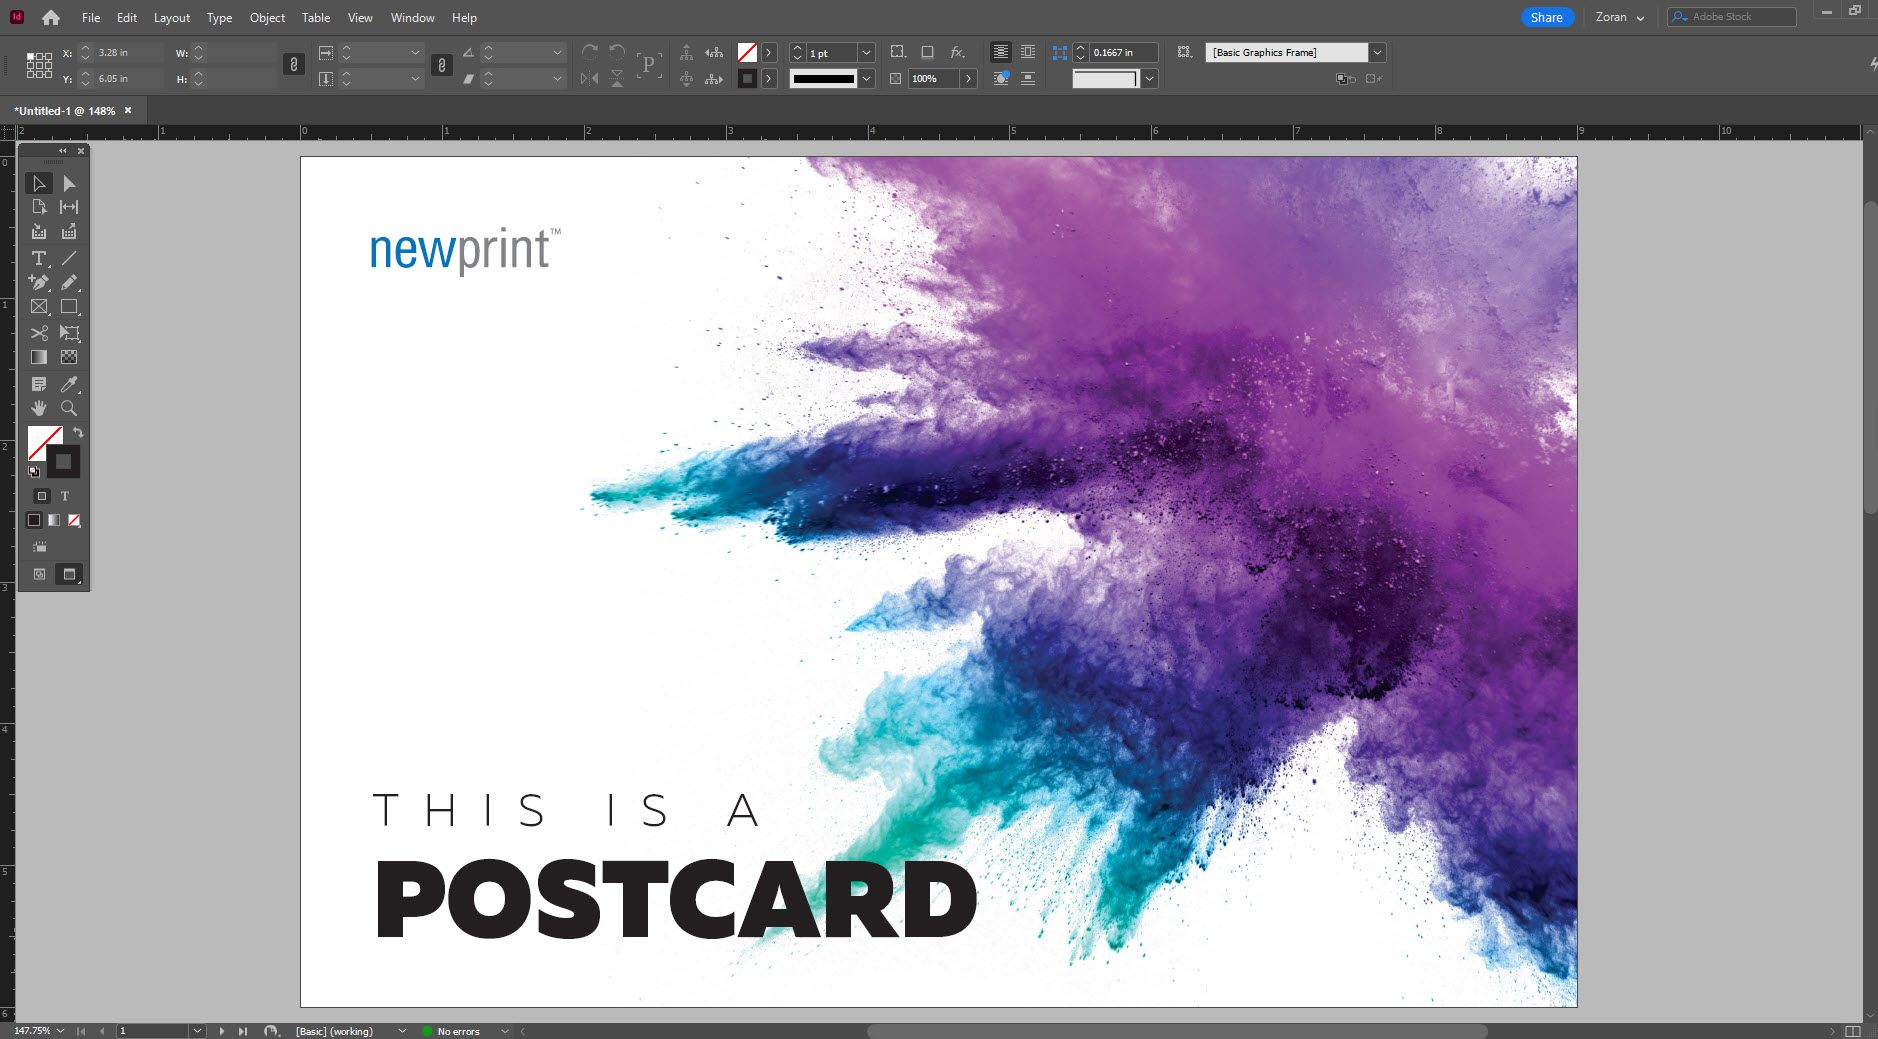 Screen shot of Adobe InDesign workspace showing a document with a postcard design applied.